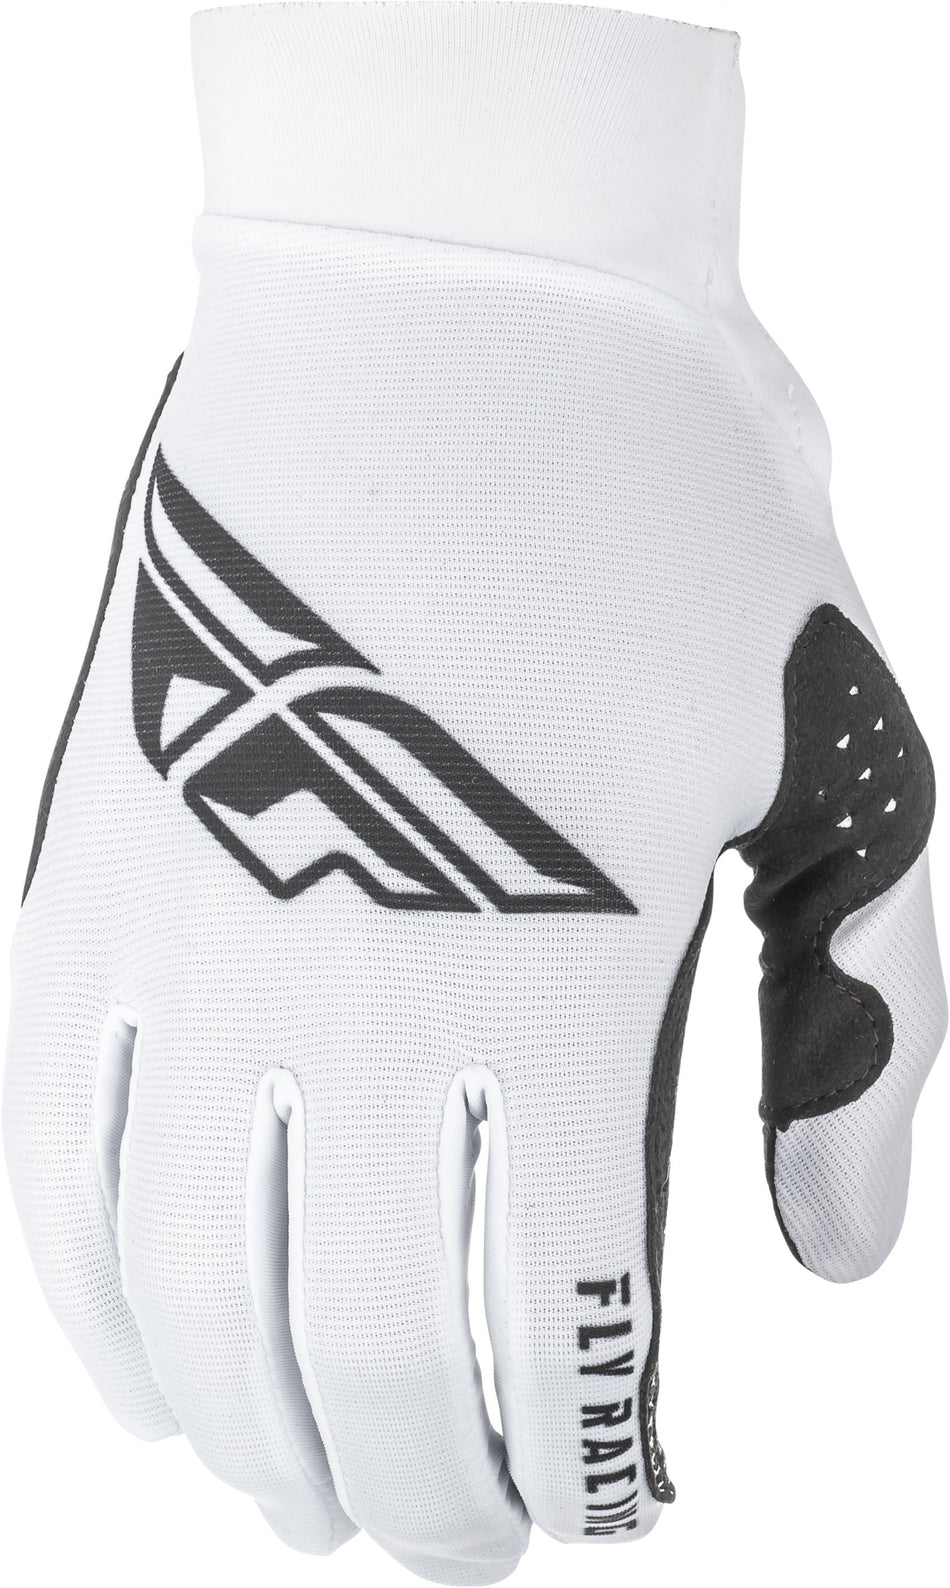 FLY RACING Pro Lite Gloves White Sz 09 372-81409